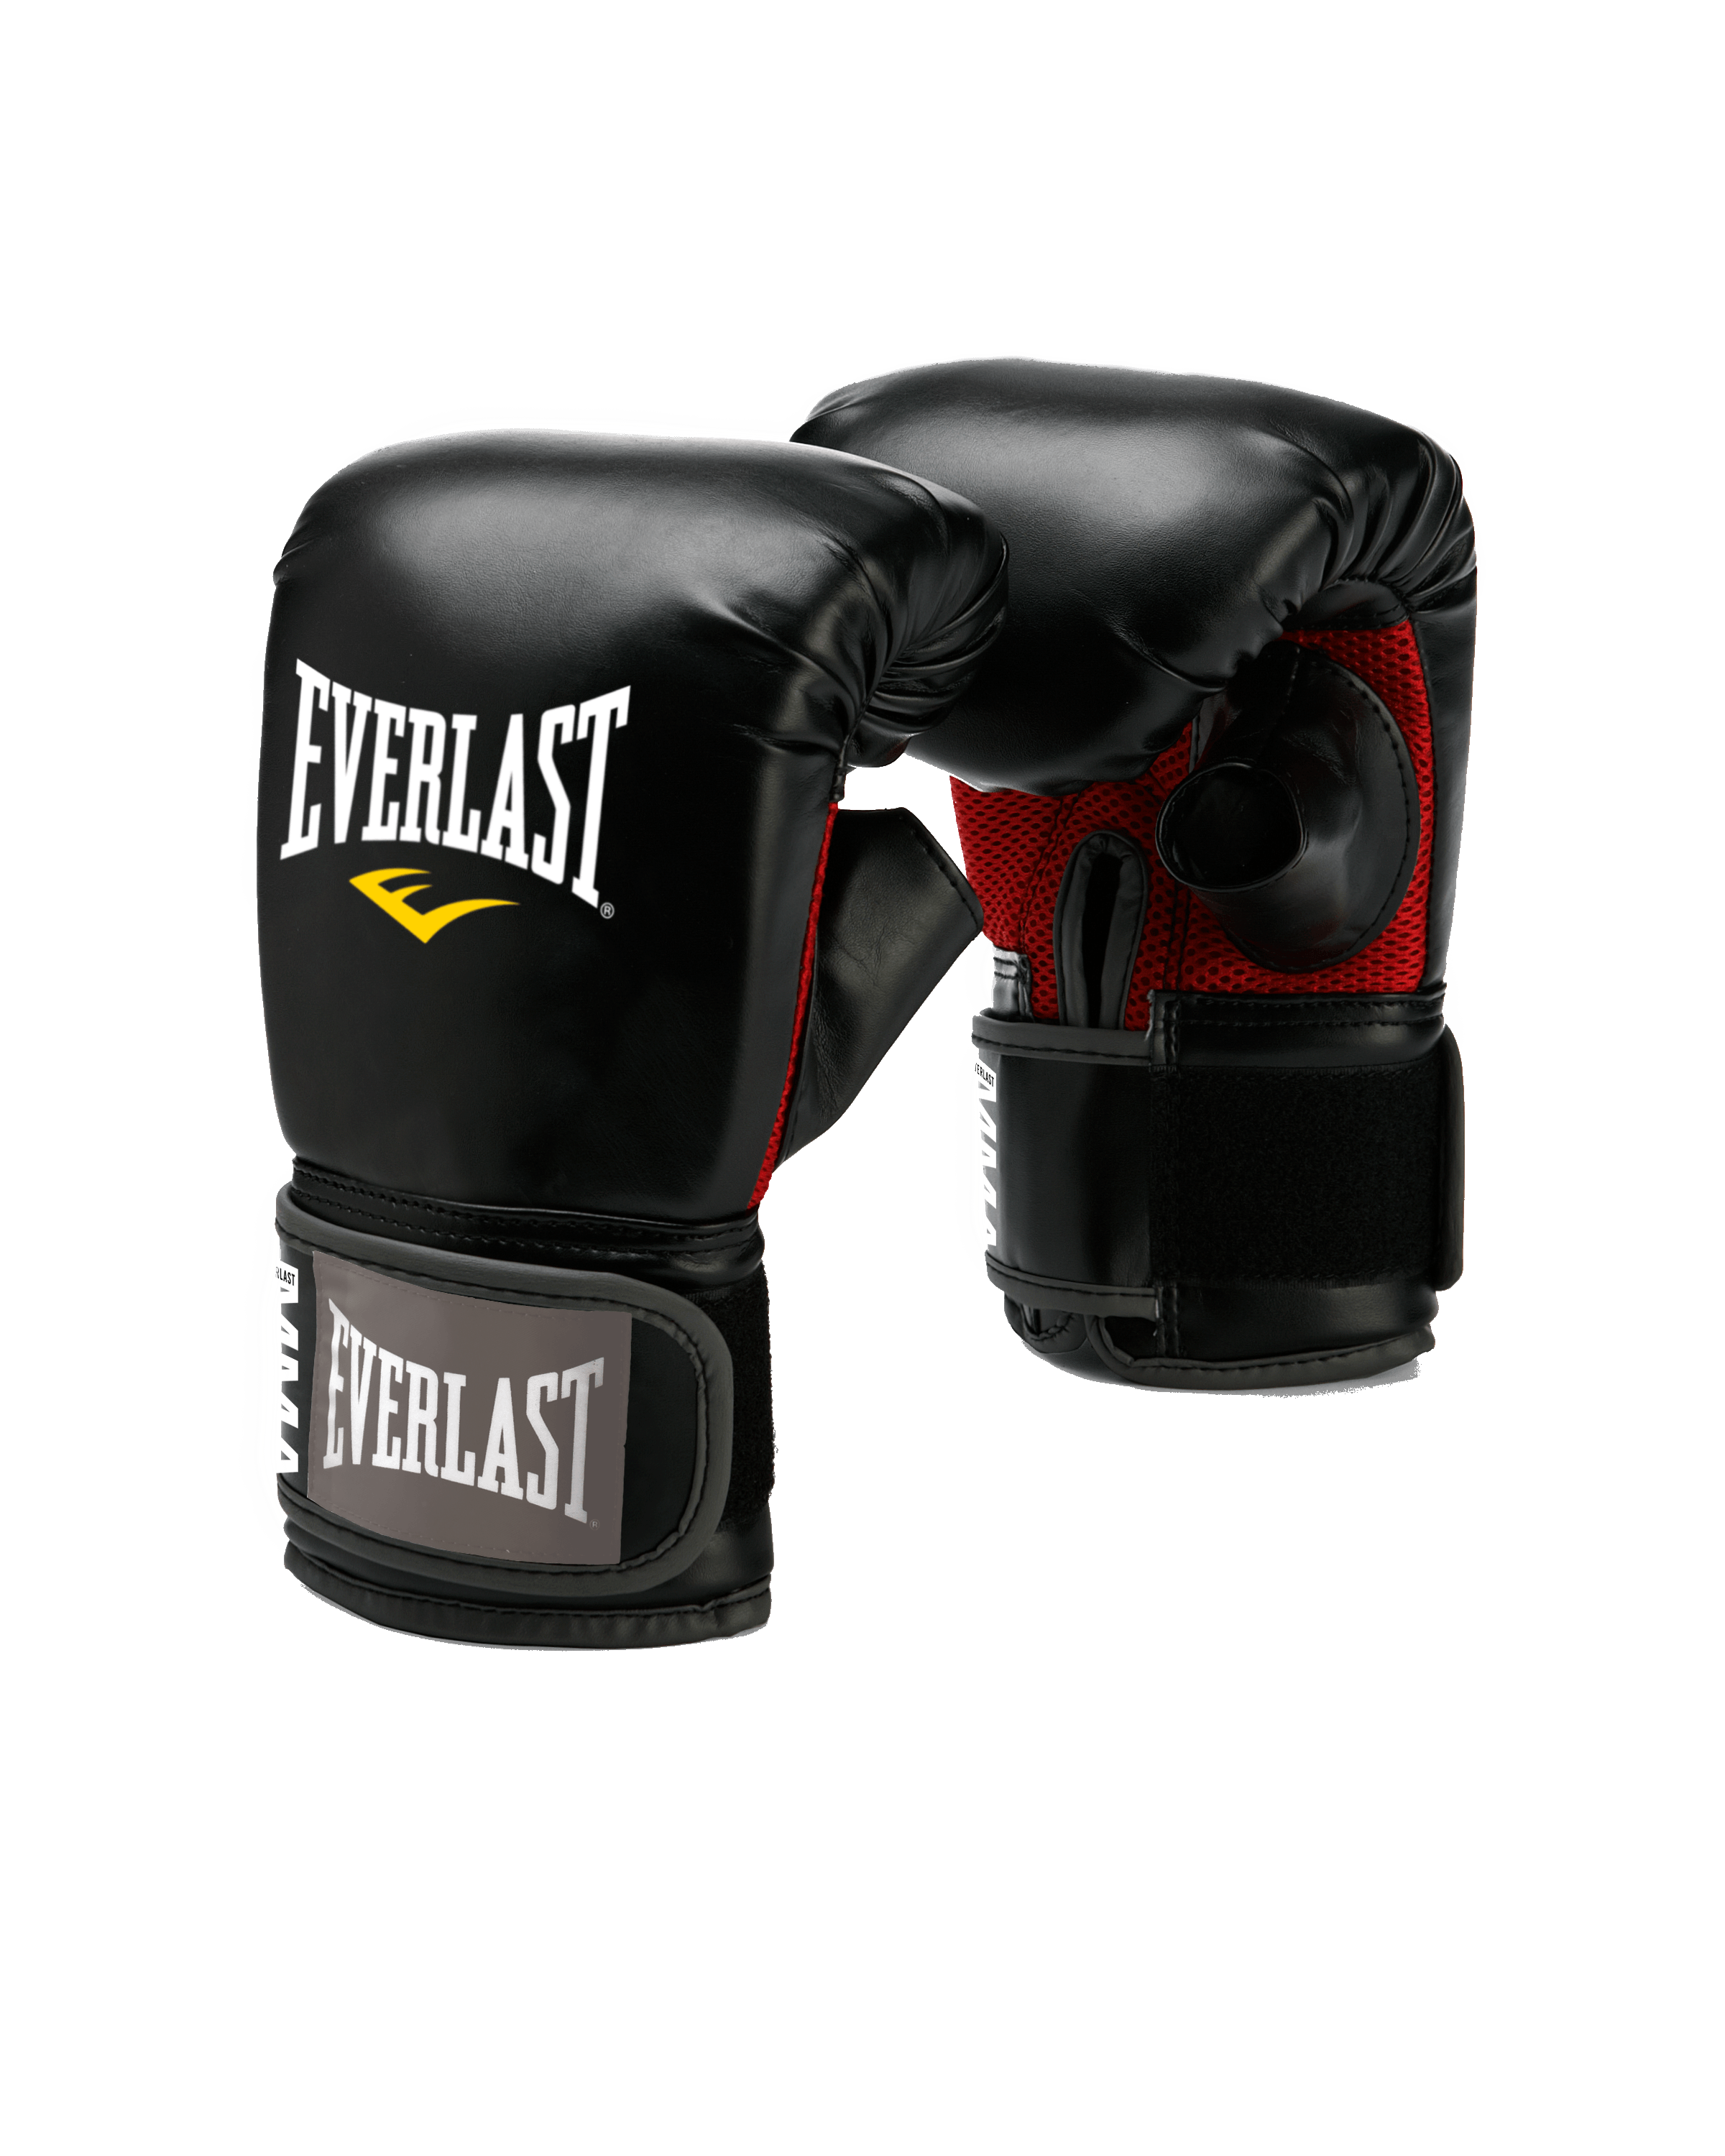 Everlast Mixed Martial Arts Heavy Bag Gloves, Large/XL Black - image 1 of 2